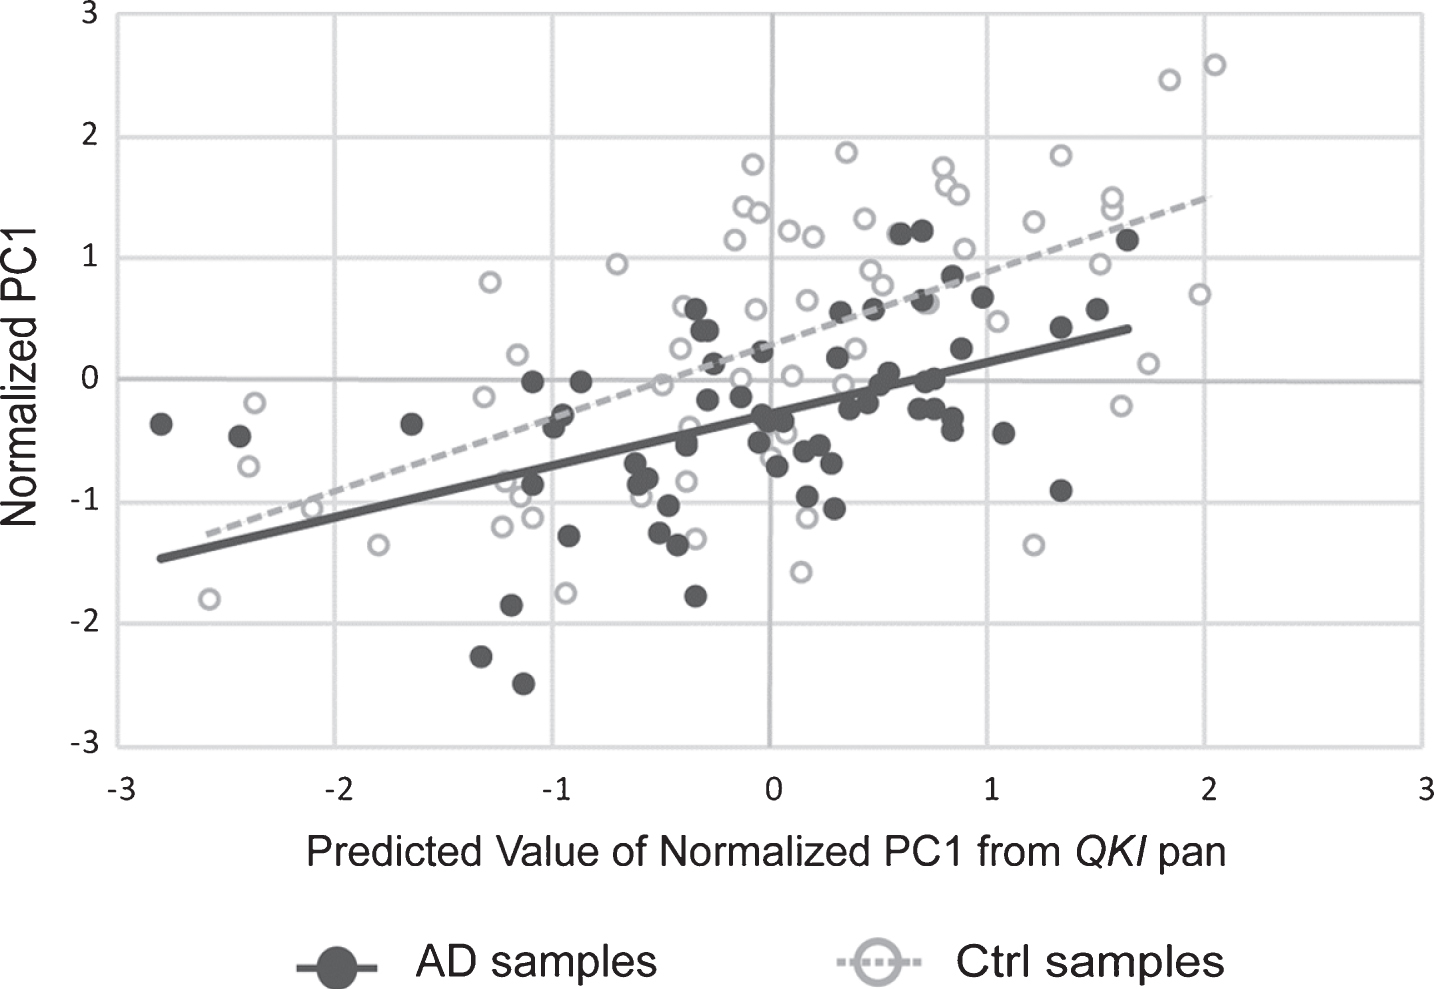 Scatterplot showing principal component (PC1) values of APP, PSEN1, and PSEN2 gene expression, with values of PC1 predicted from QKI pan (standardized regression values). sAD samples are shown in filled circles with solid line of best fit. Control samples are shown in open circles, with dashed line of best fit. The distance between the circles and the line of best fit is representative of model accuracy, with shorter distances equating to a better fit.